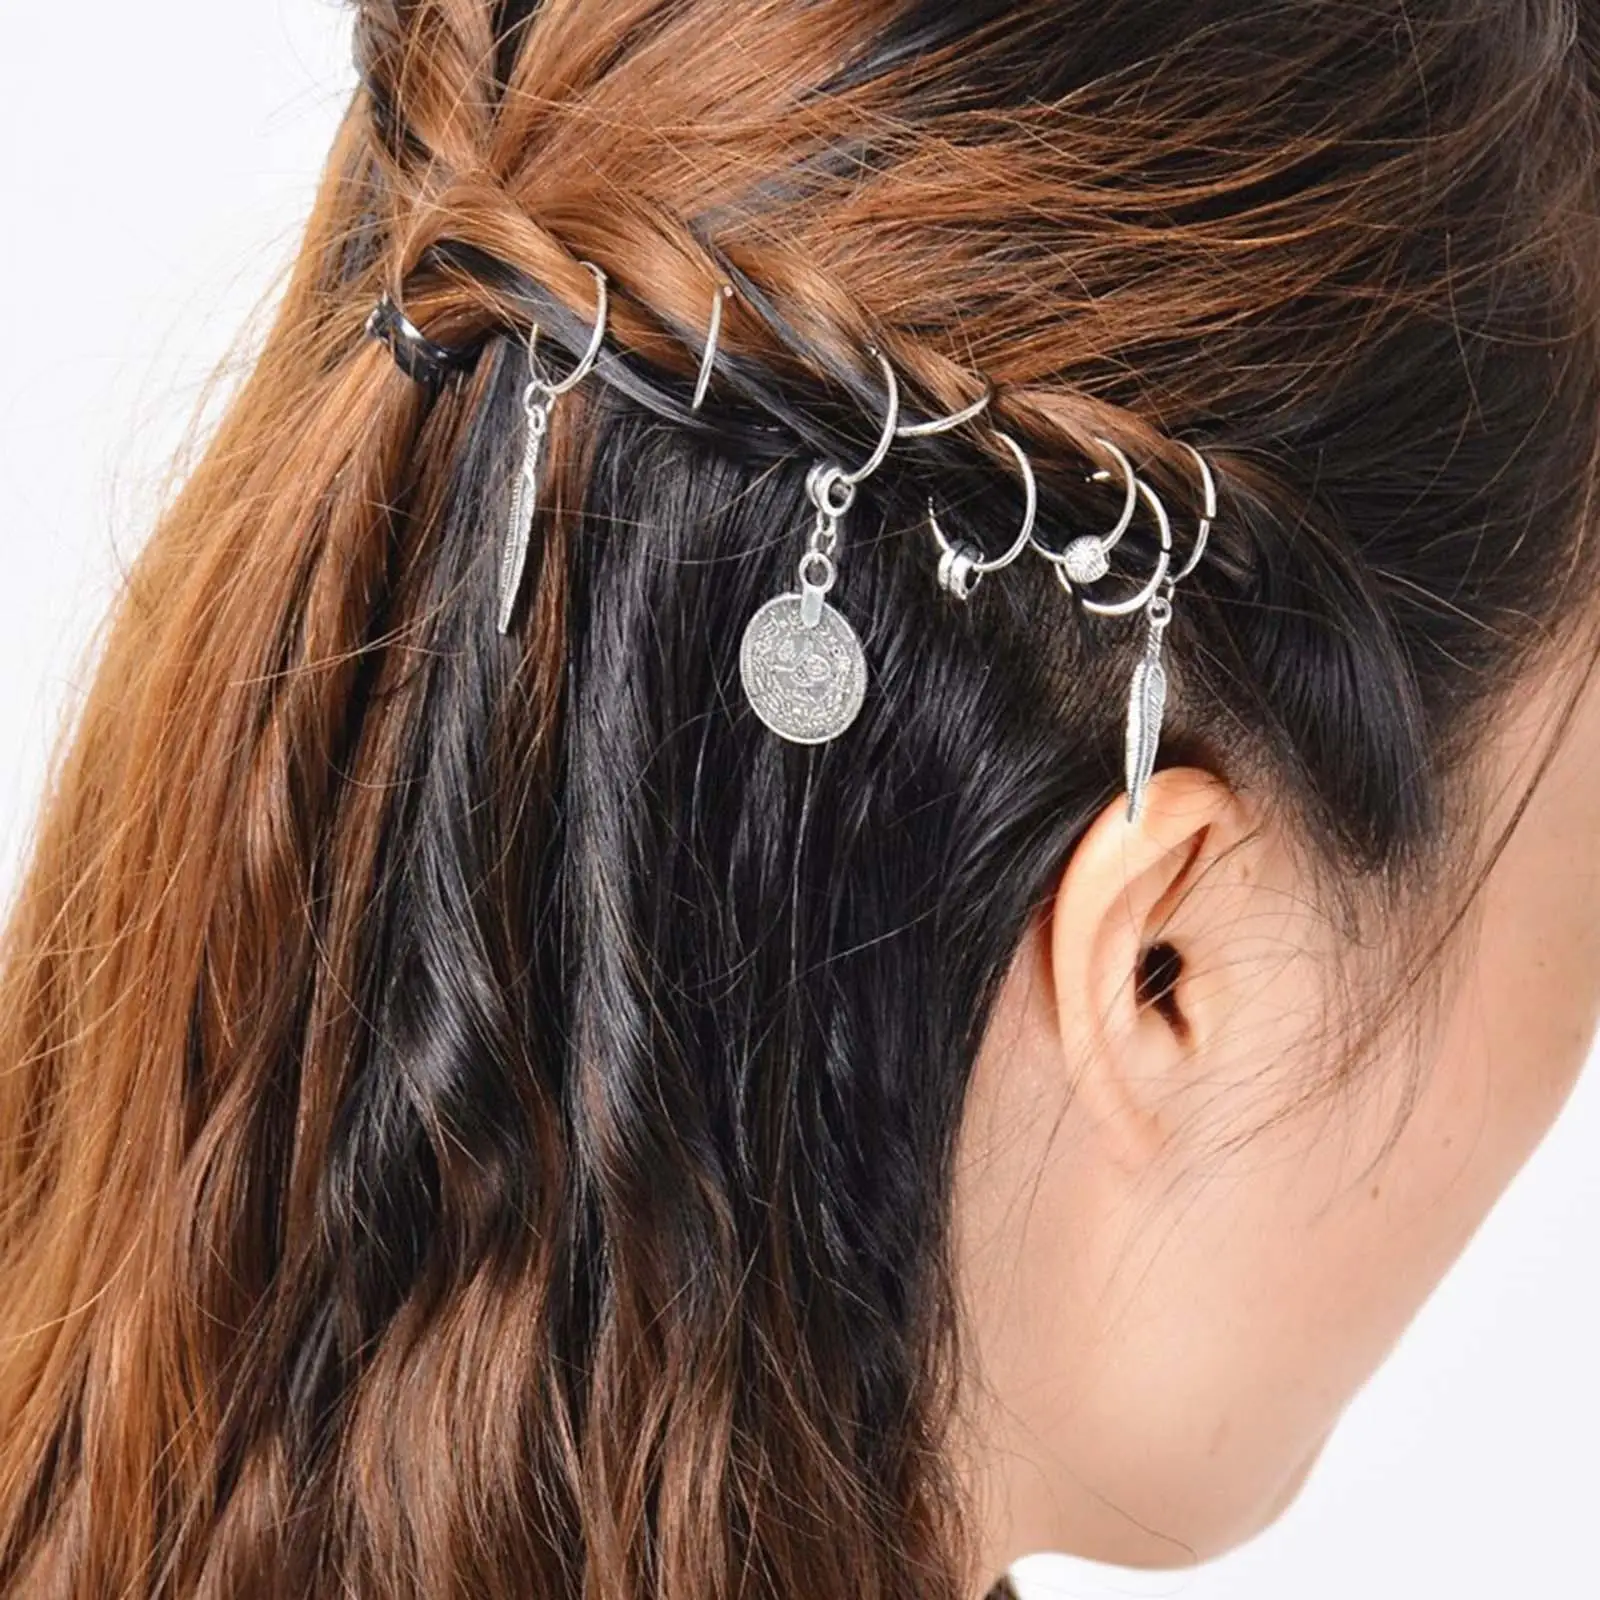 8 Pieces Hair Braid Dreadlock Clips Cuffs Rings jewelry Hip Hop Style Clasps Accessories